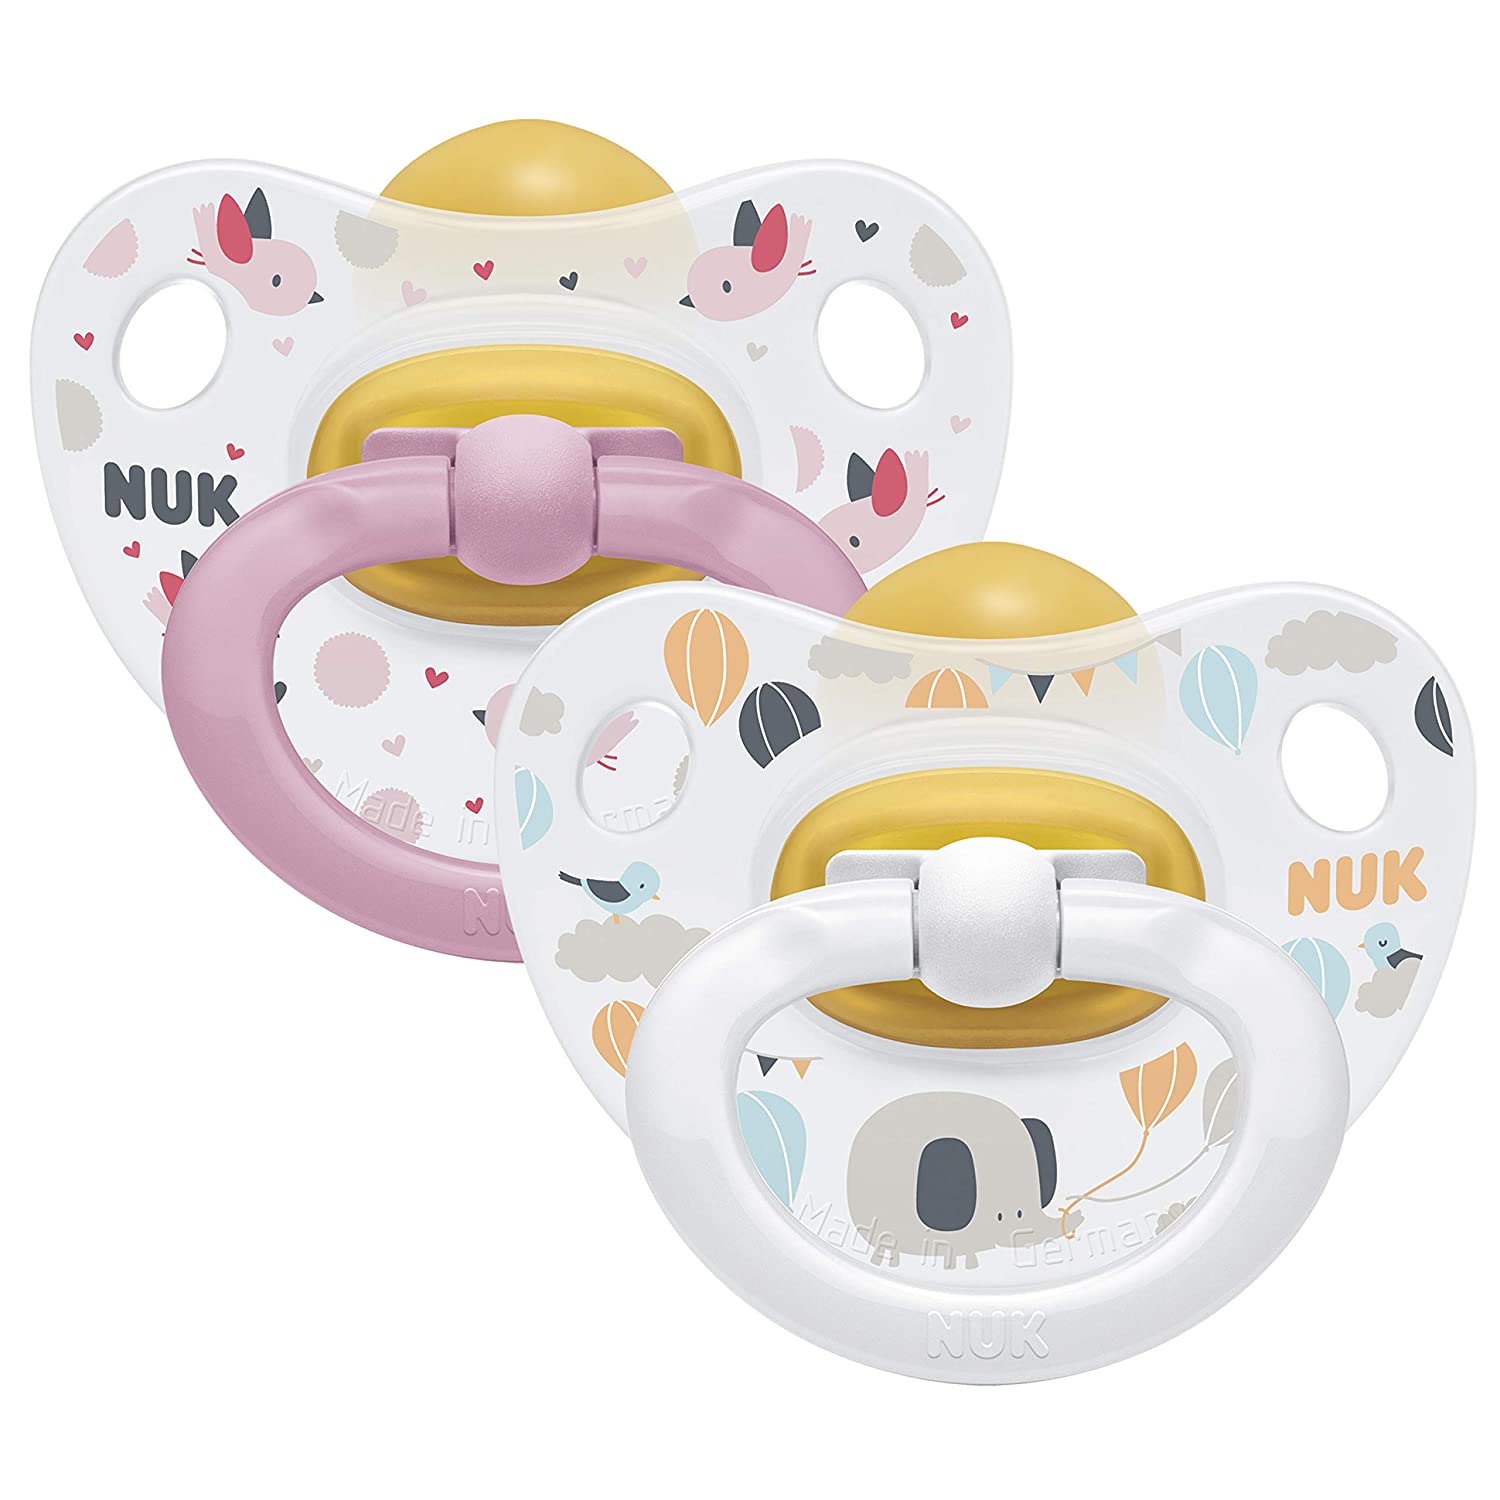 NUK Happy Kids Dummy, 0-6 Months, Latex and Orthodontic Shape, Pink & White, Pack of 2